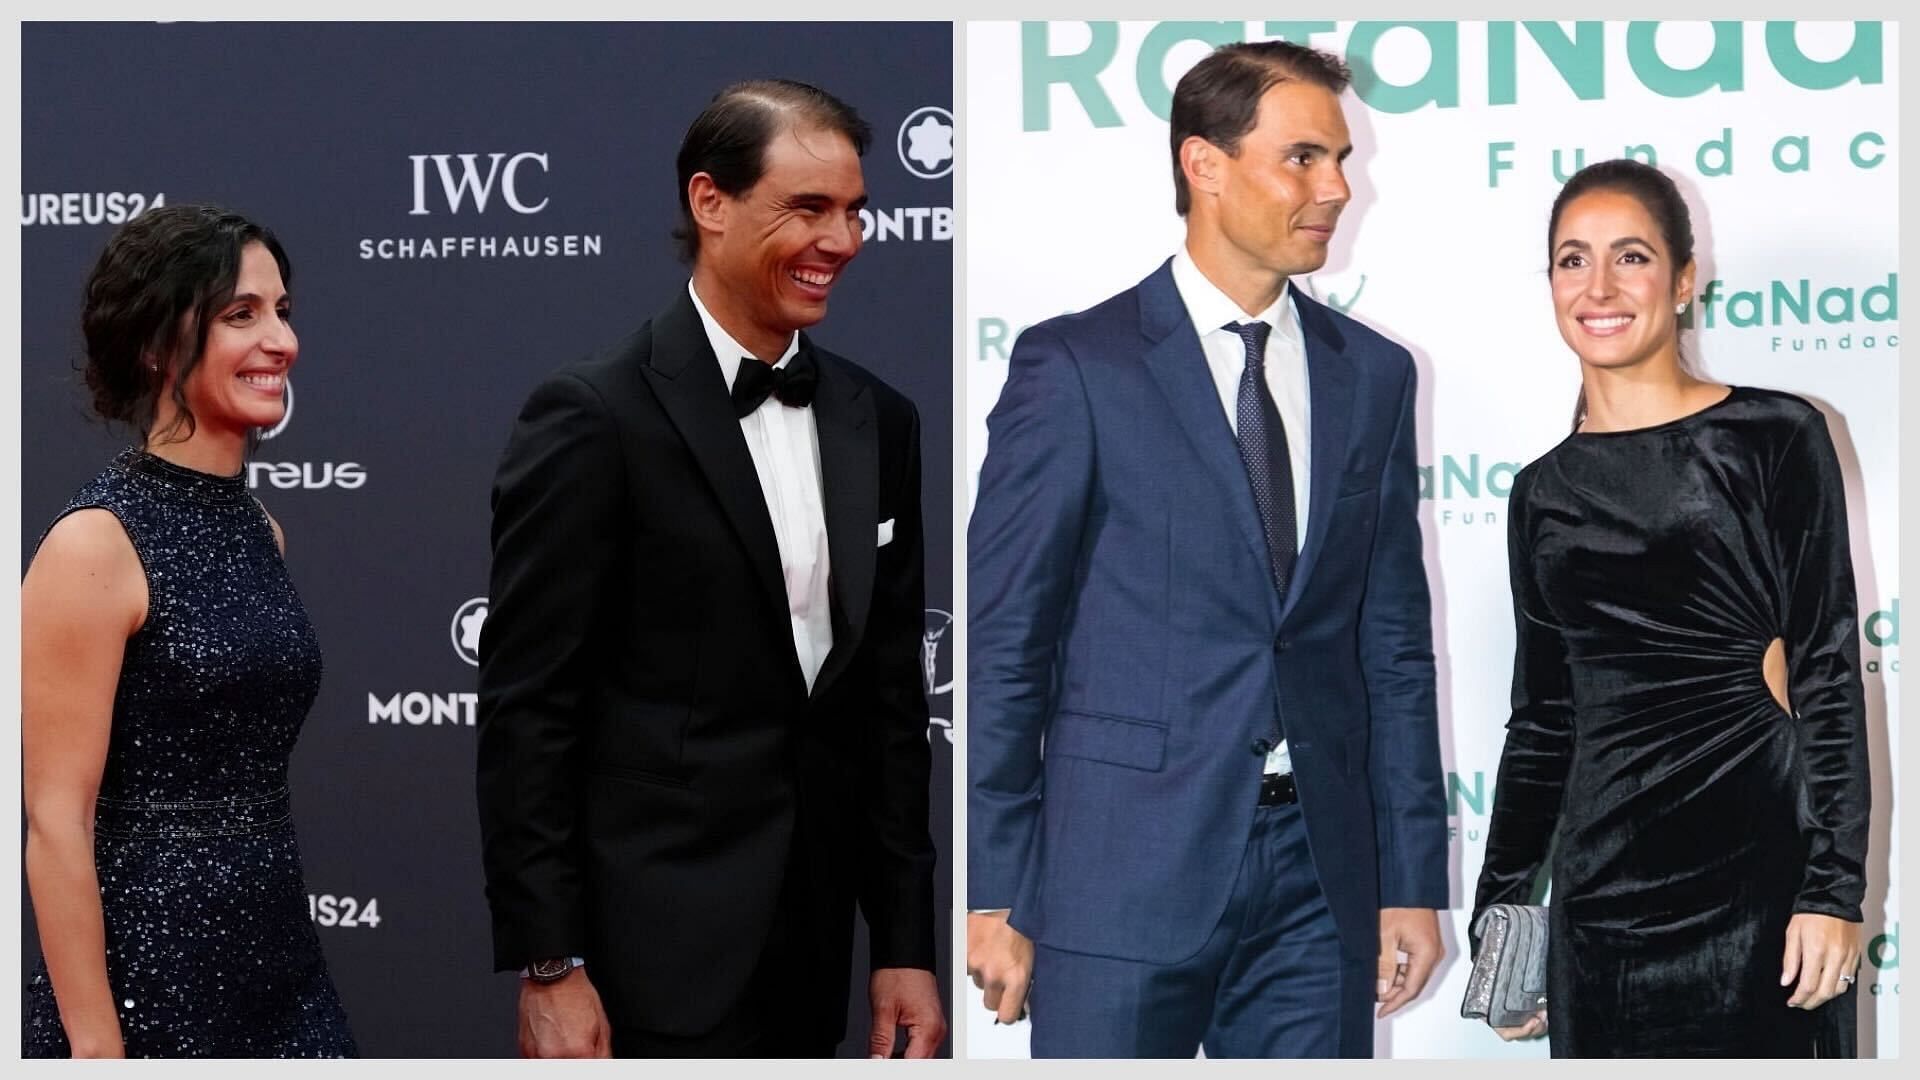 Nadal and his wife Maria remain one of the most famous couples in tennis